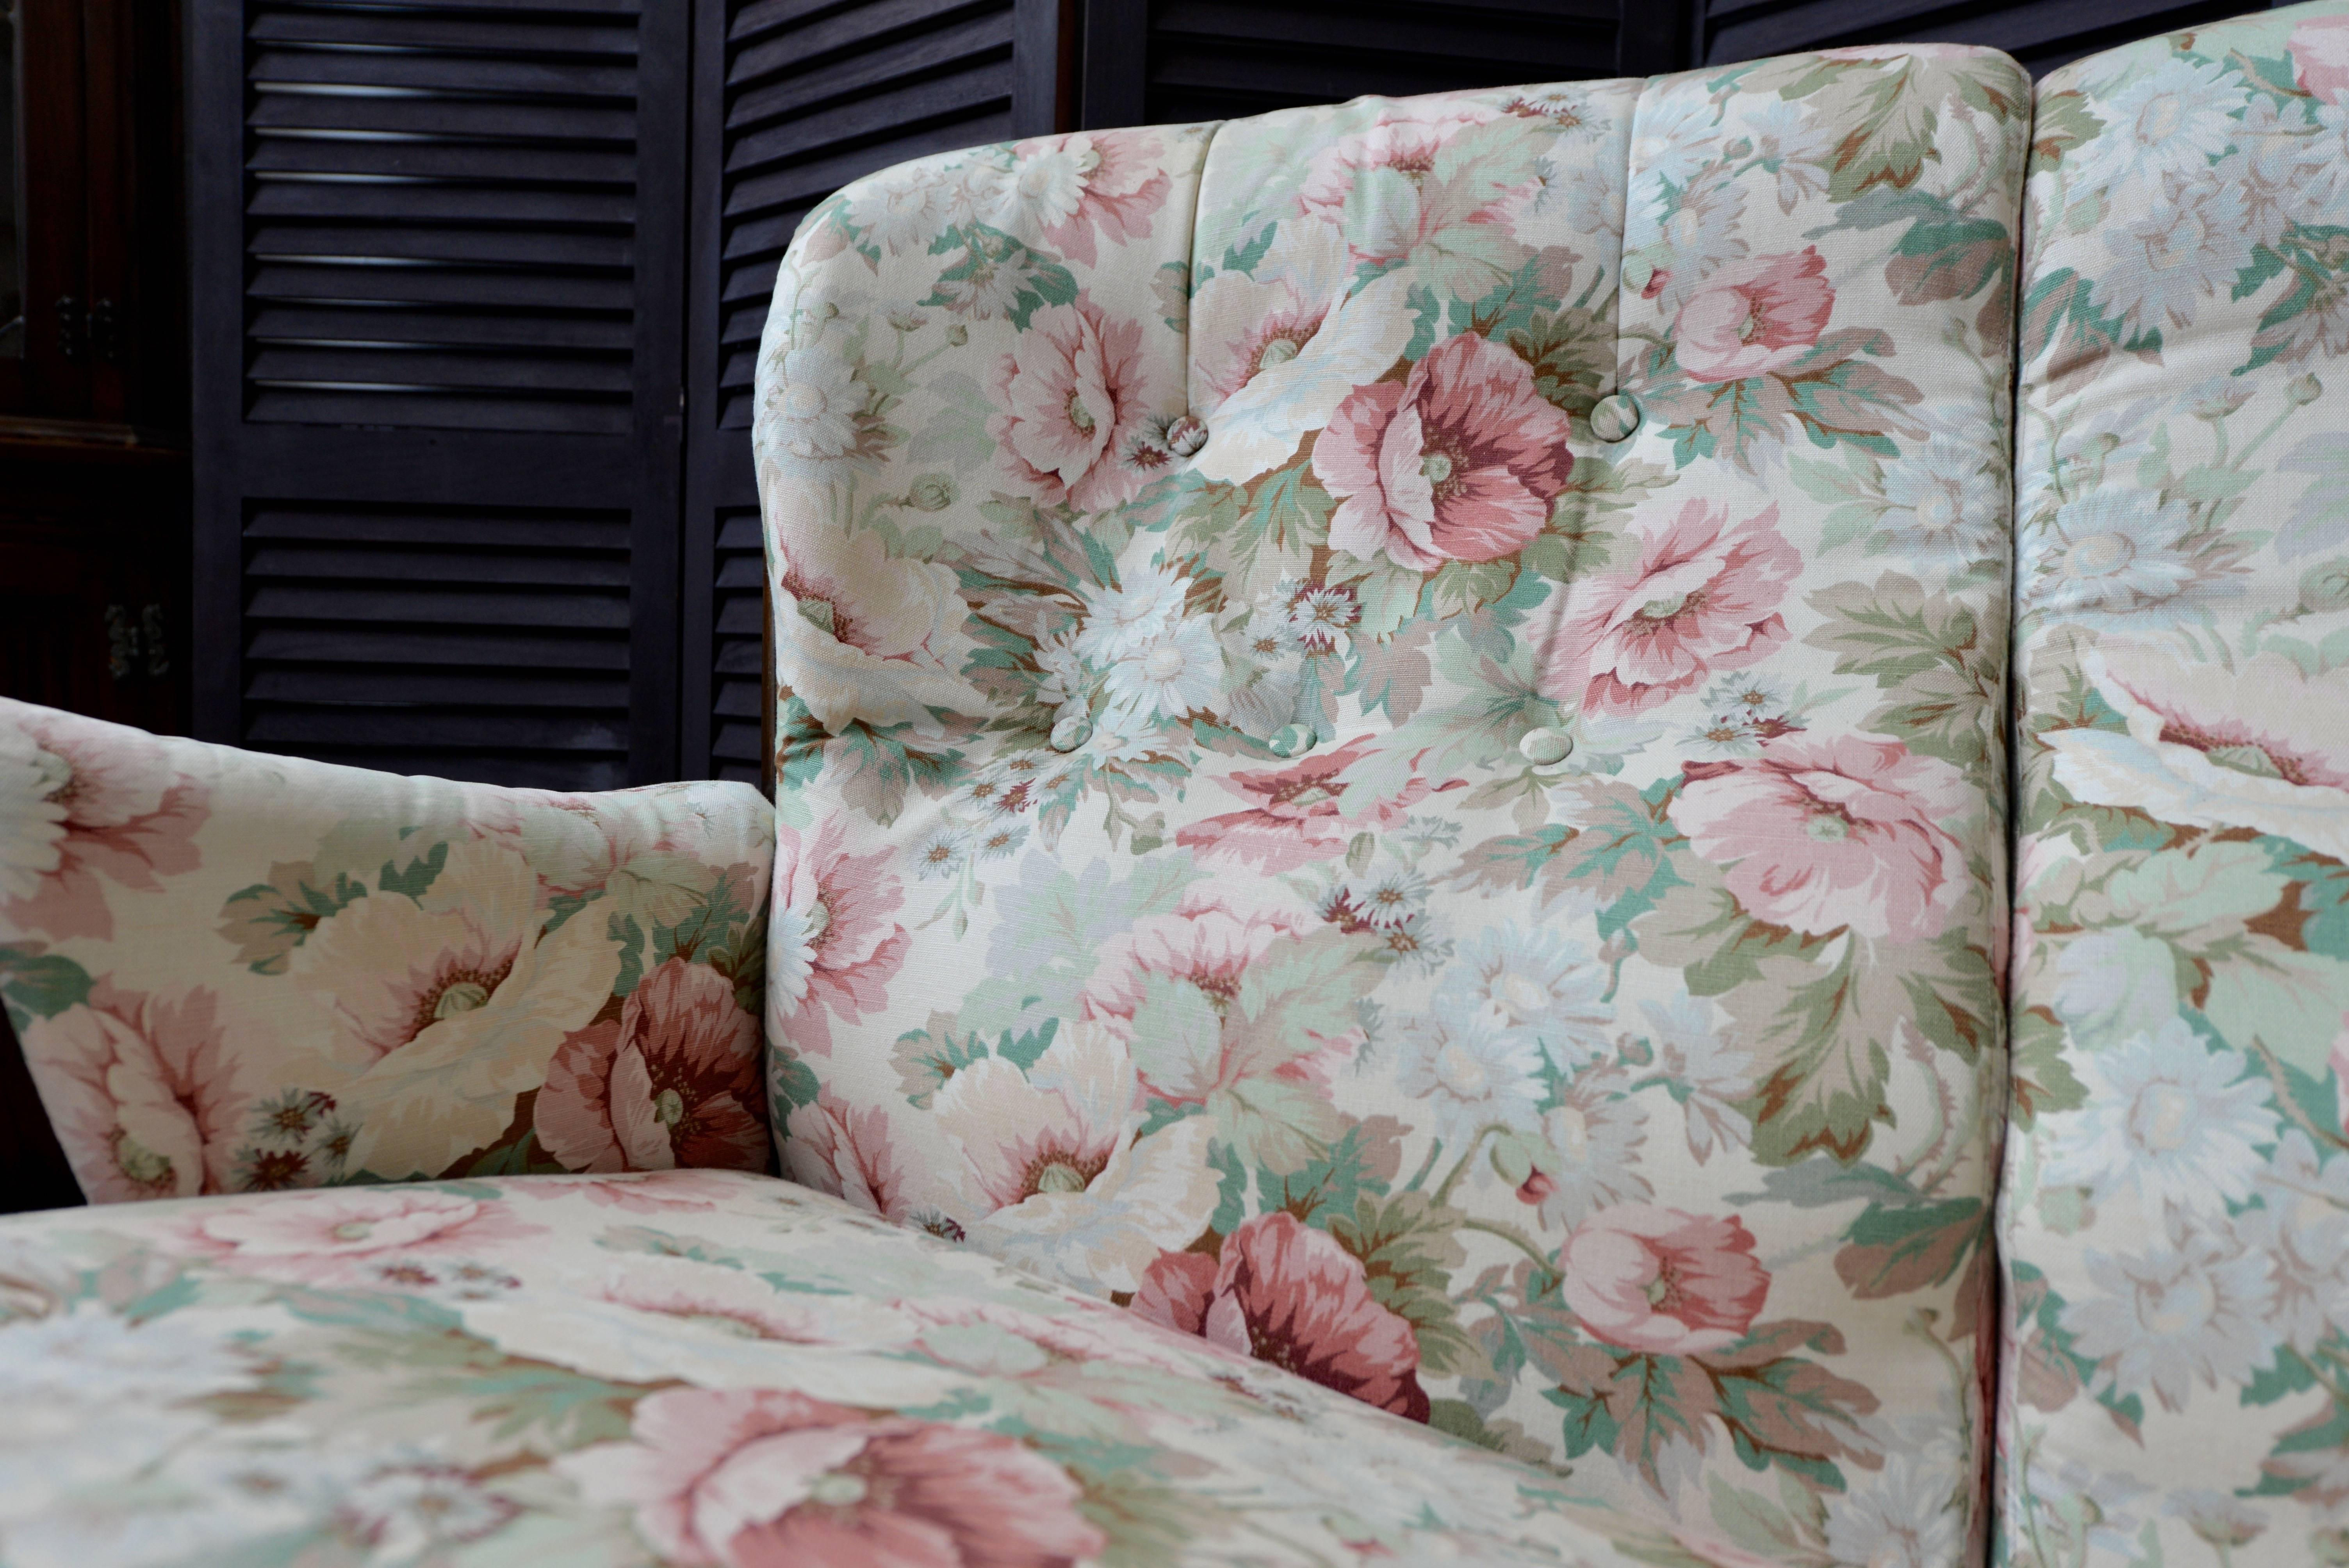 1960 Ercol Evergreen Two-Seat Sofa with Original Garden Blossom Upholstery 1